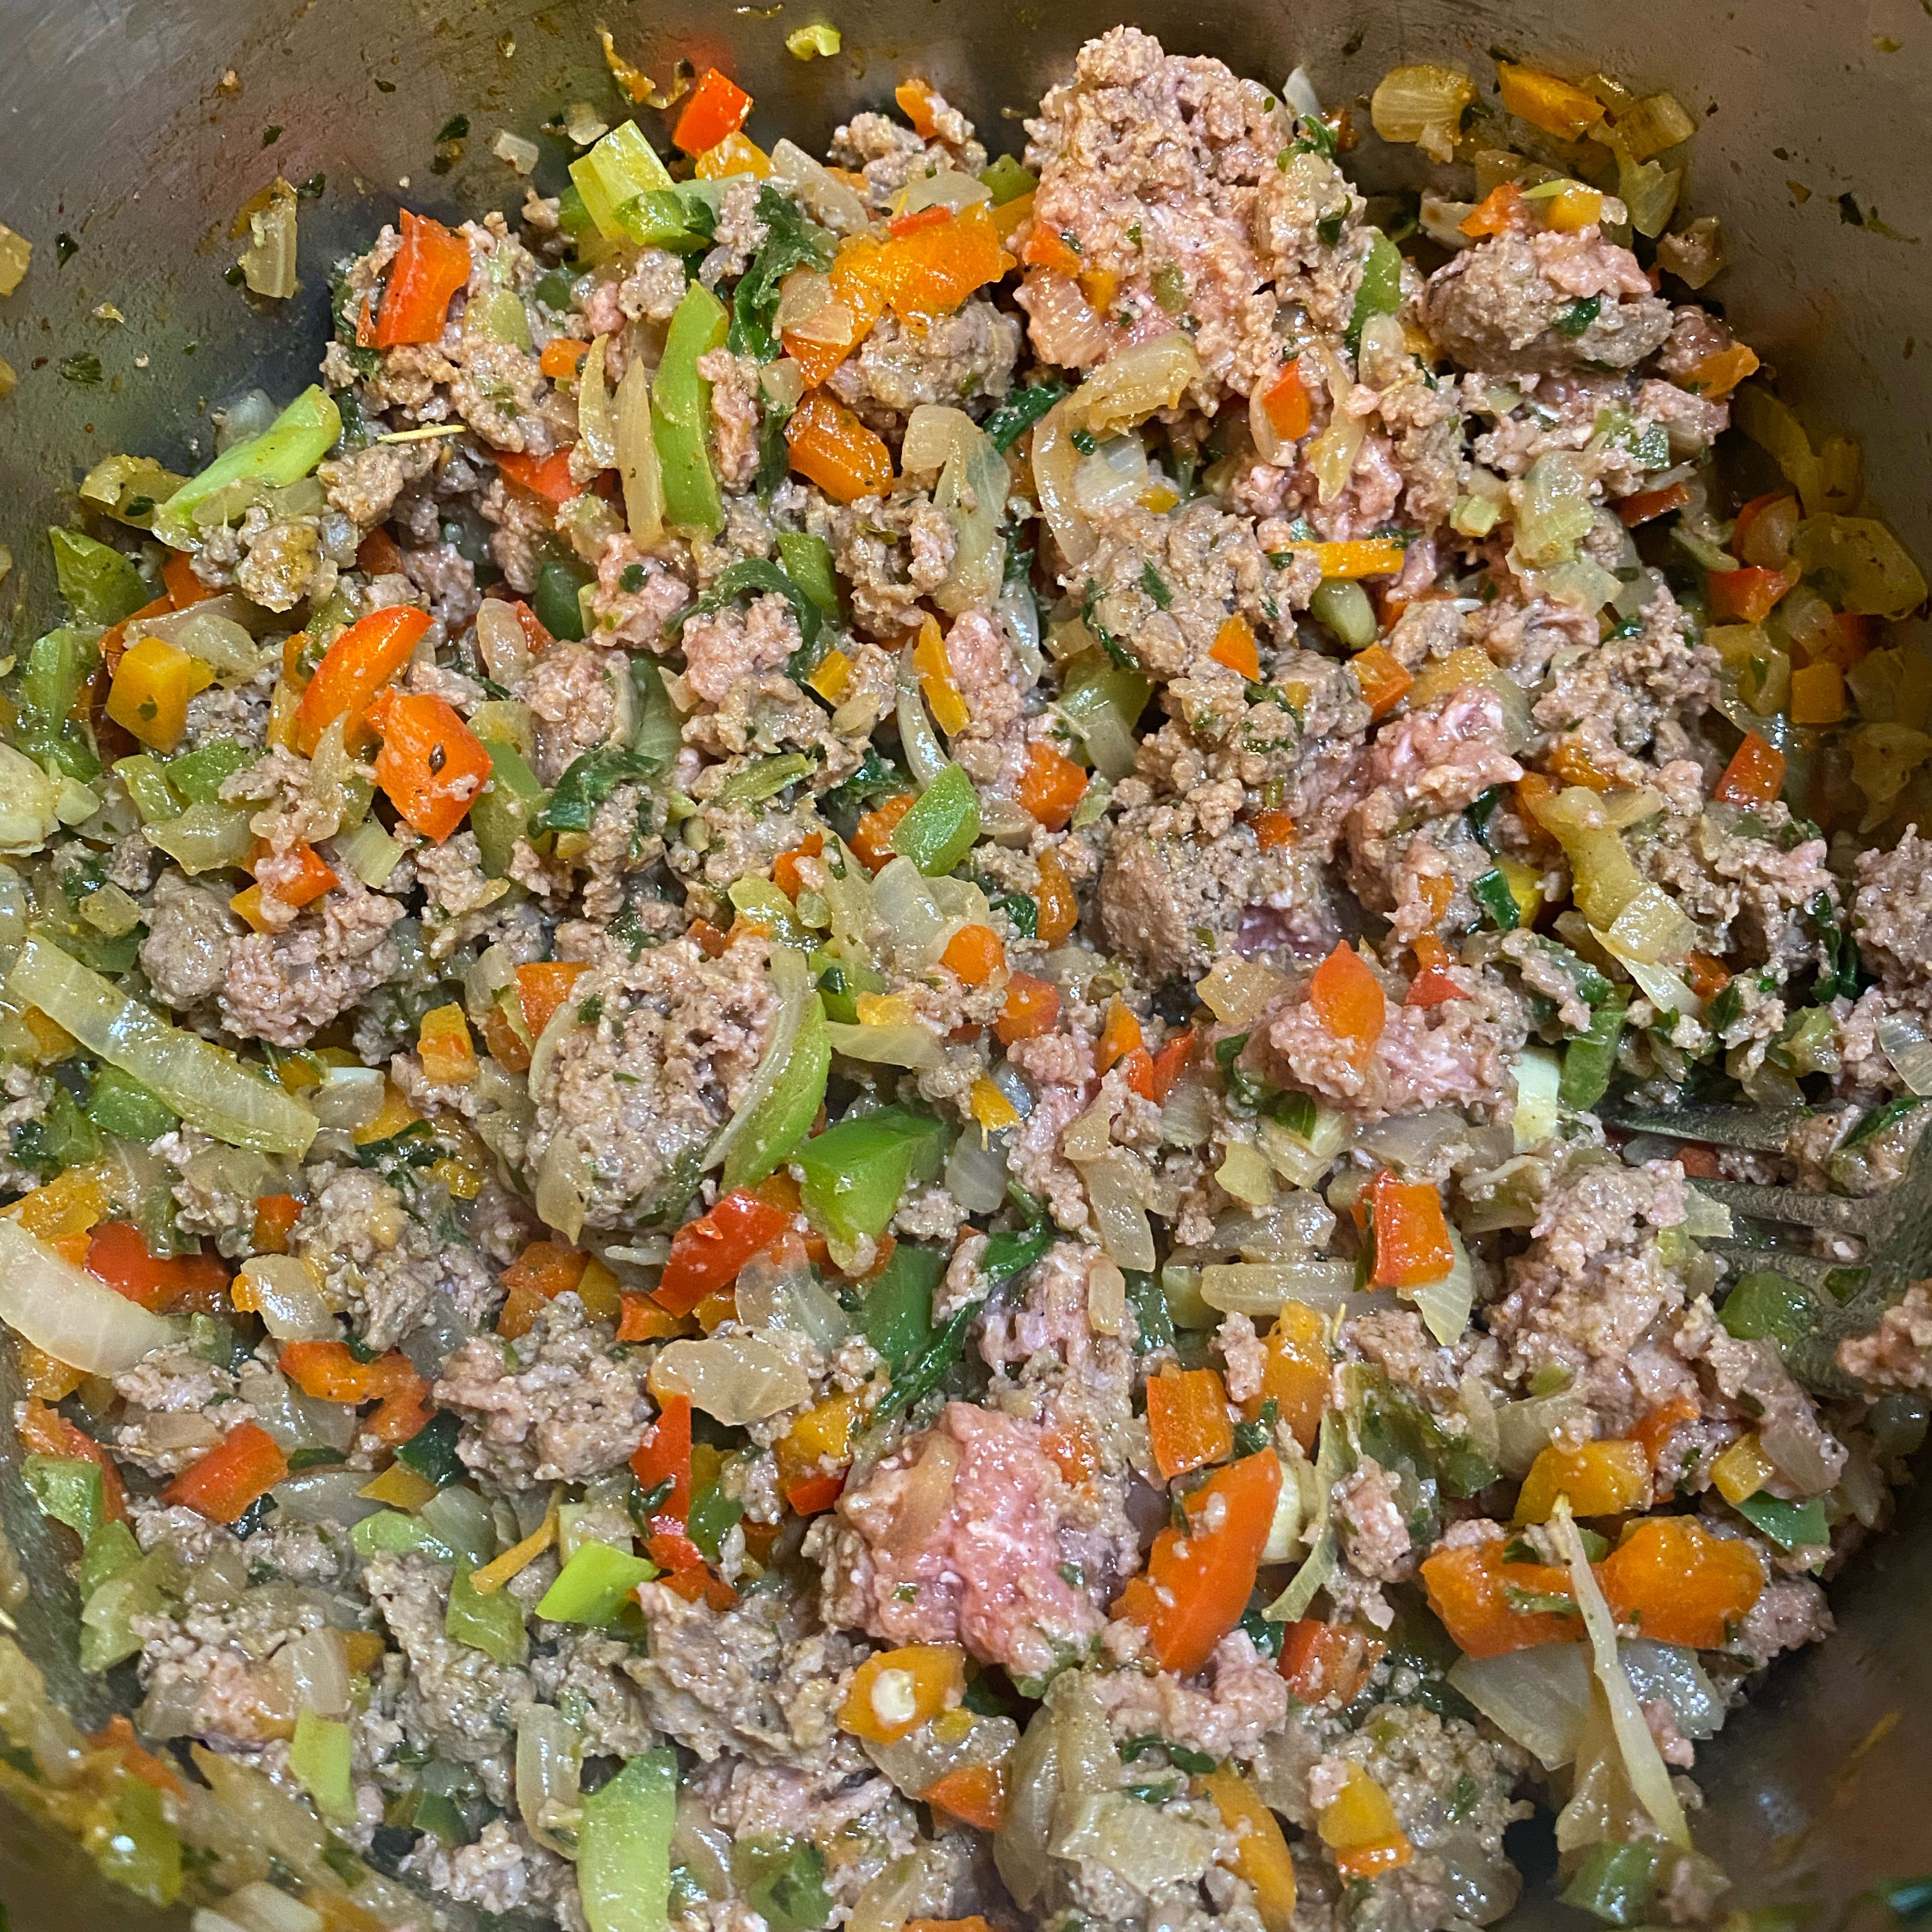 Stir the remaining ingredients into the ground beef.